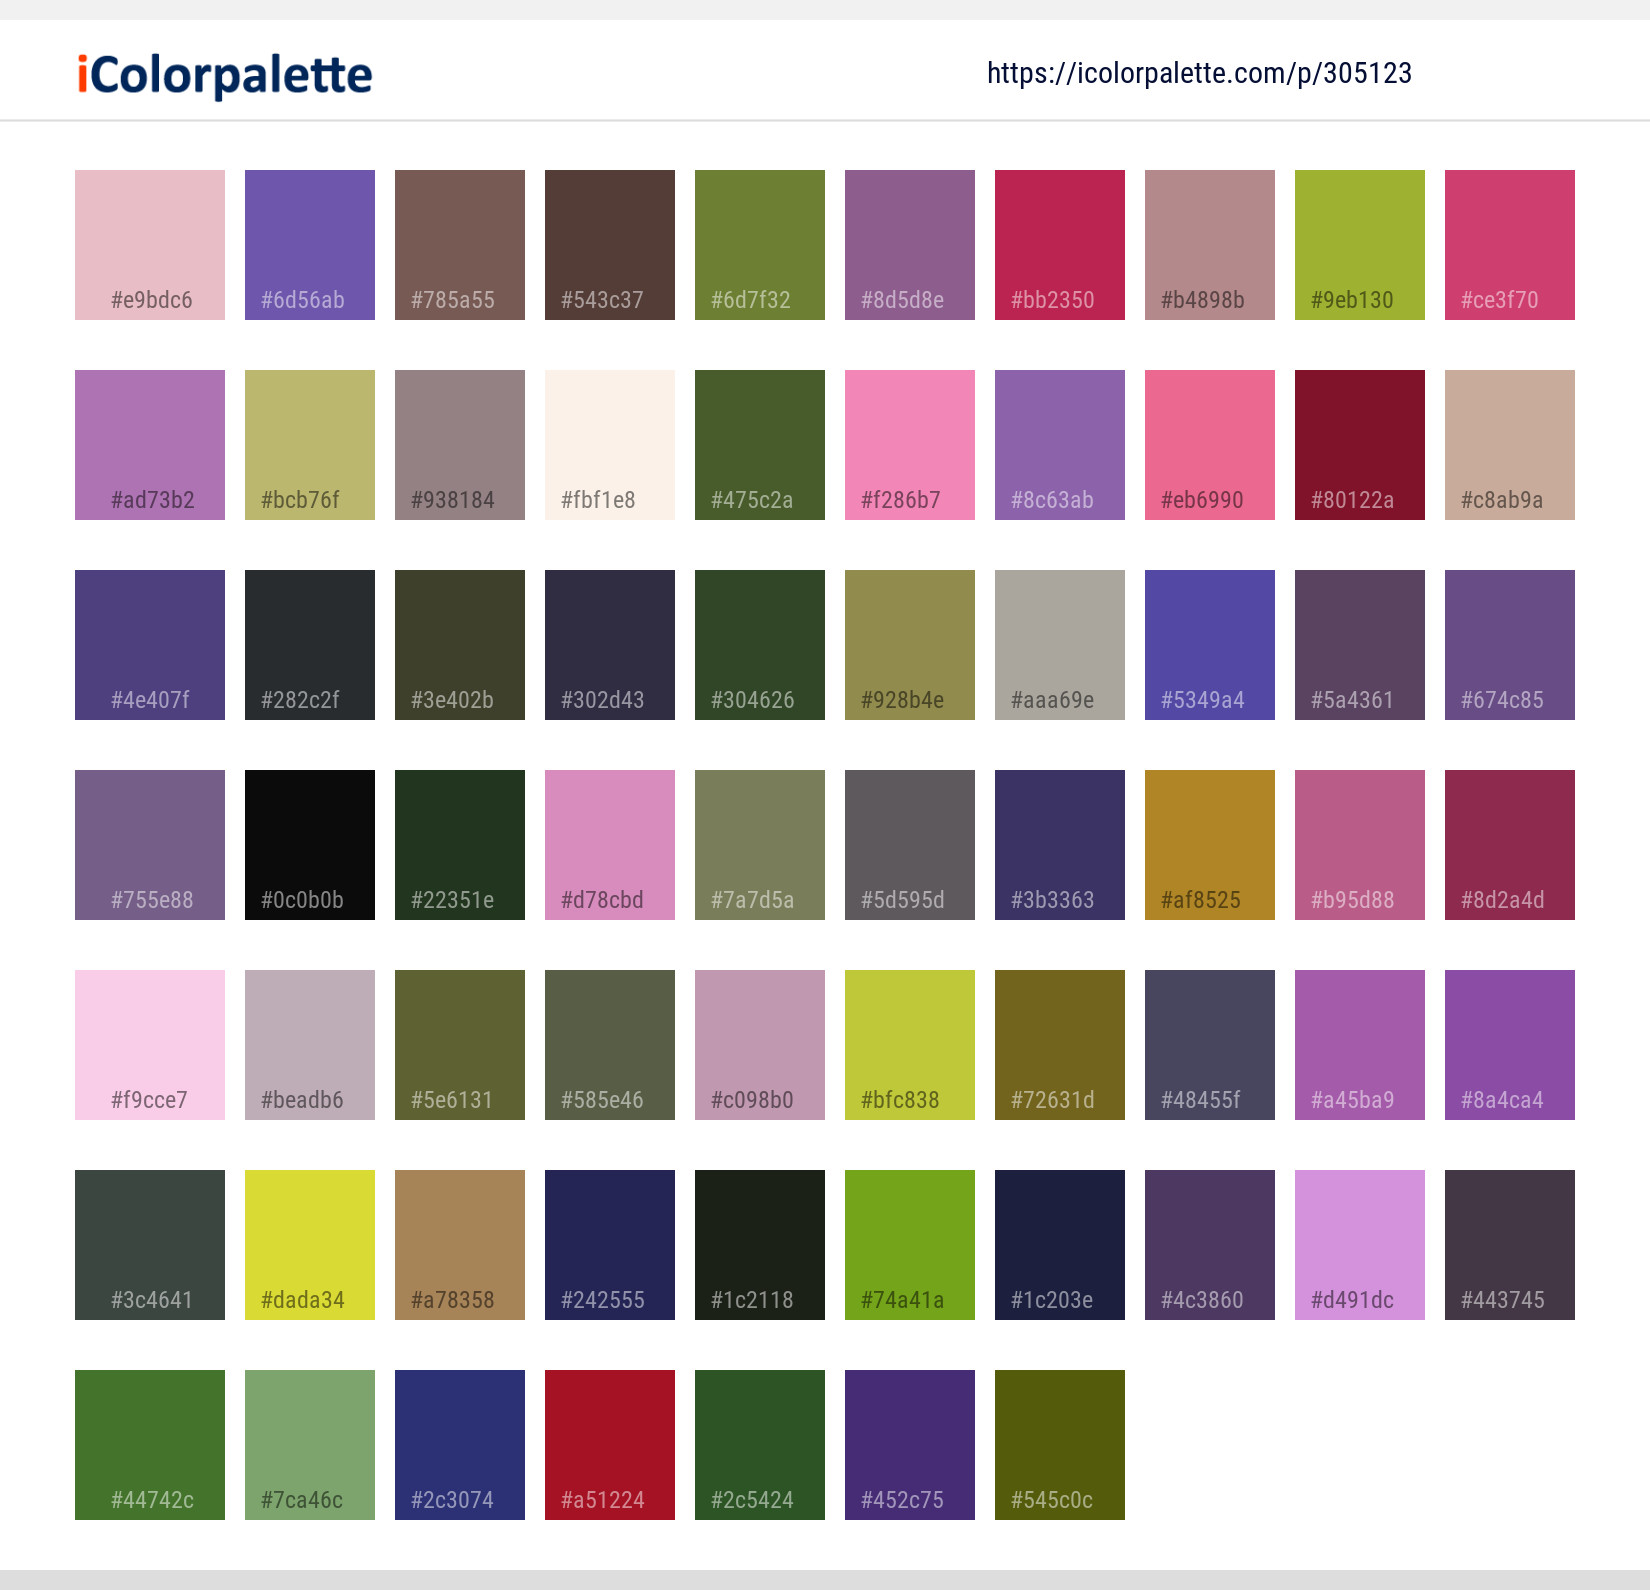 Color Palette Ideas from Flower Plant Pink Image | iColorpalette